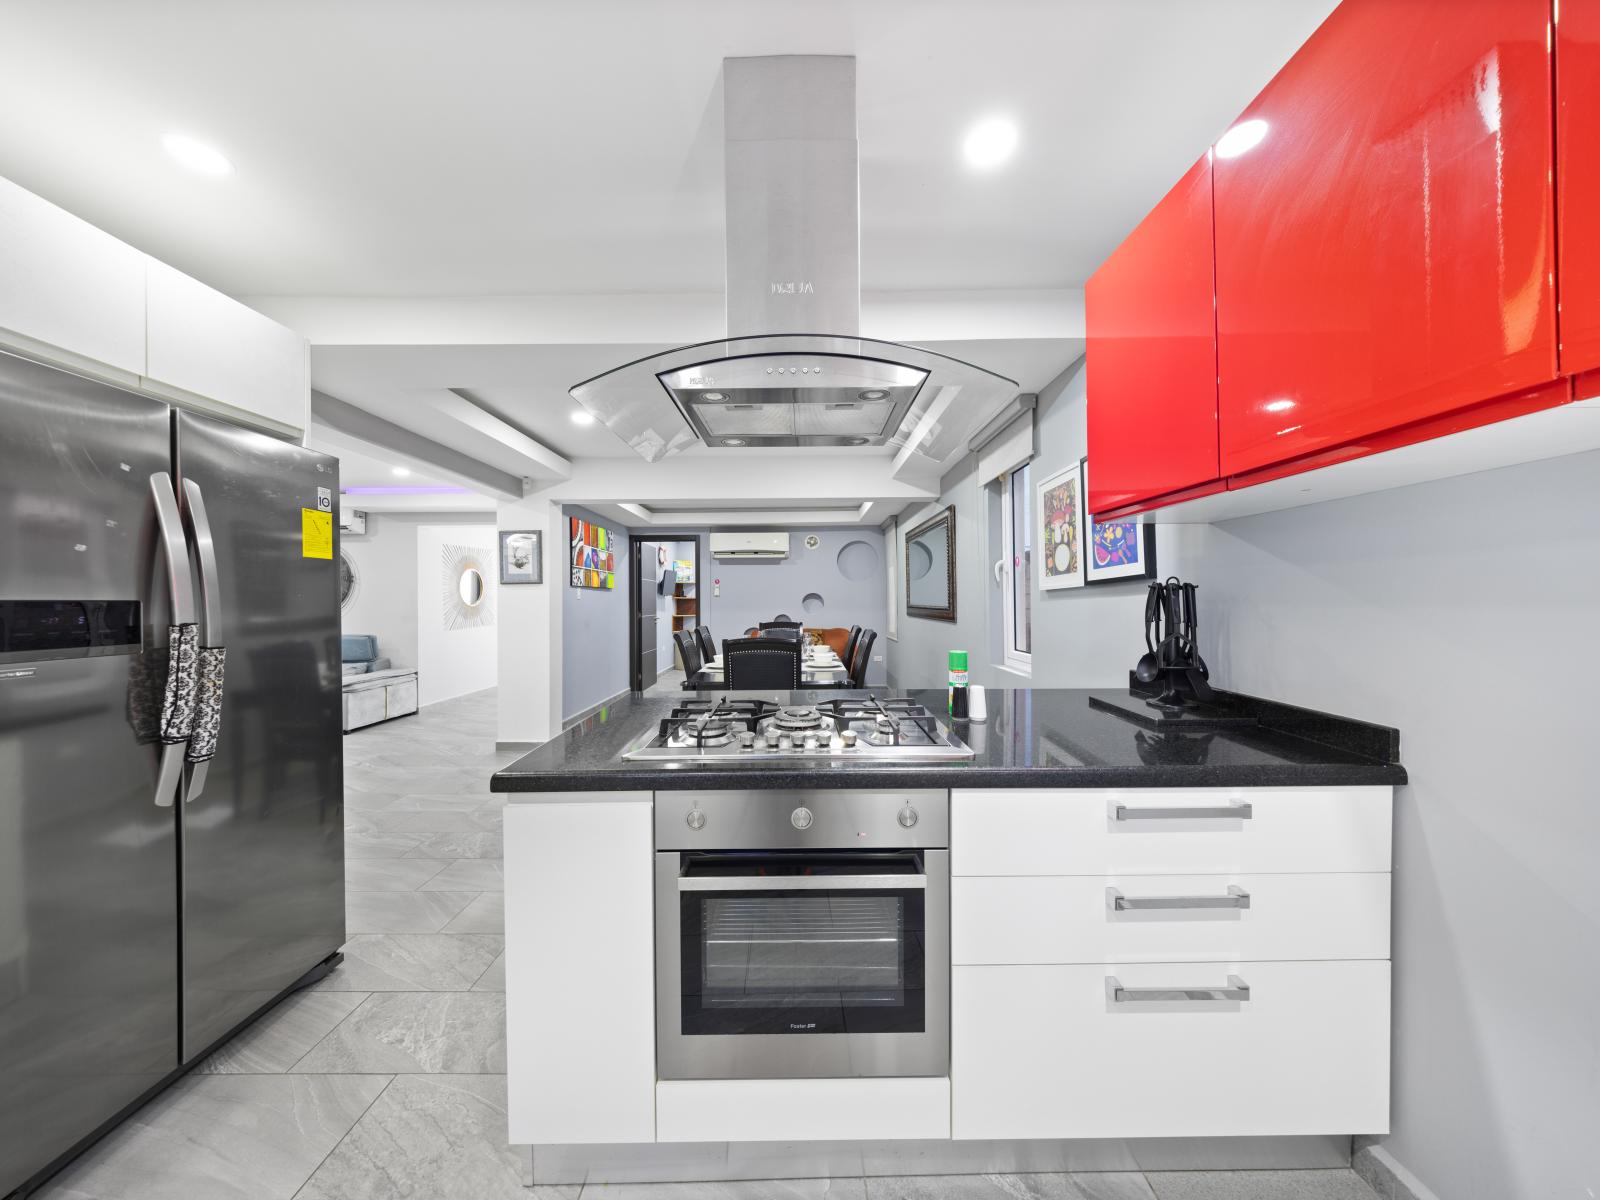 Step into culinary bliss with our fully equipped kitchen, where every tool and appliance await your culinary creations. From sleek countertops to state-of-the-art appliances, this kitchen is a haven for aspiring chefs and seasoned cooks alike.